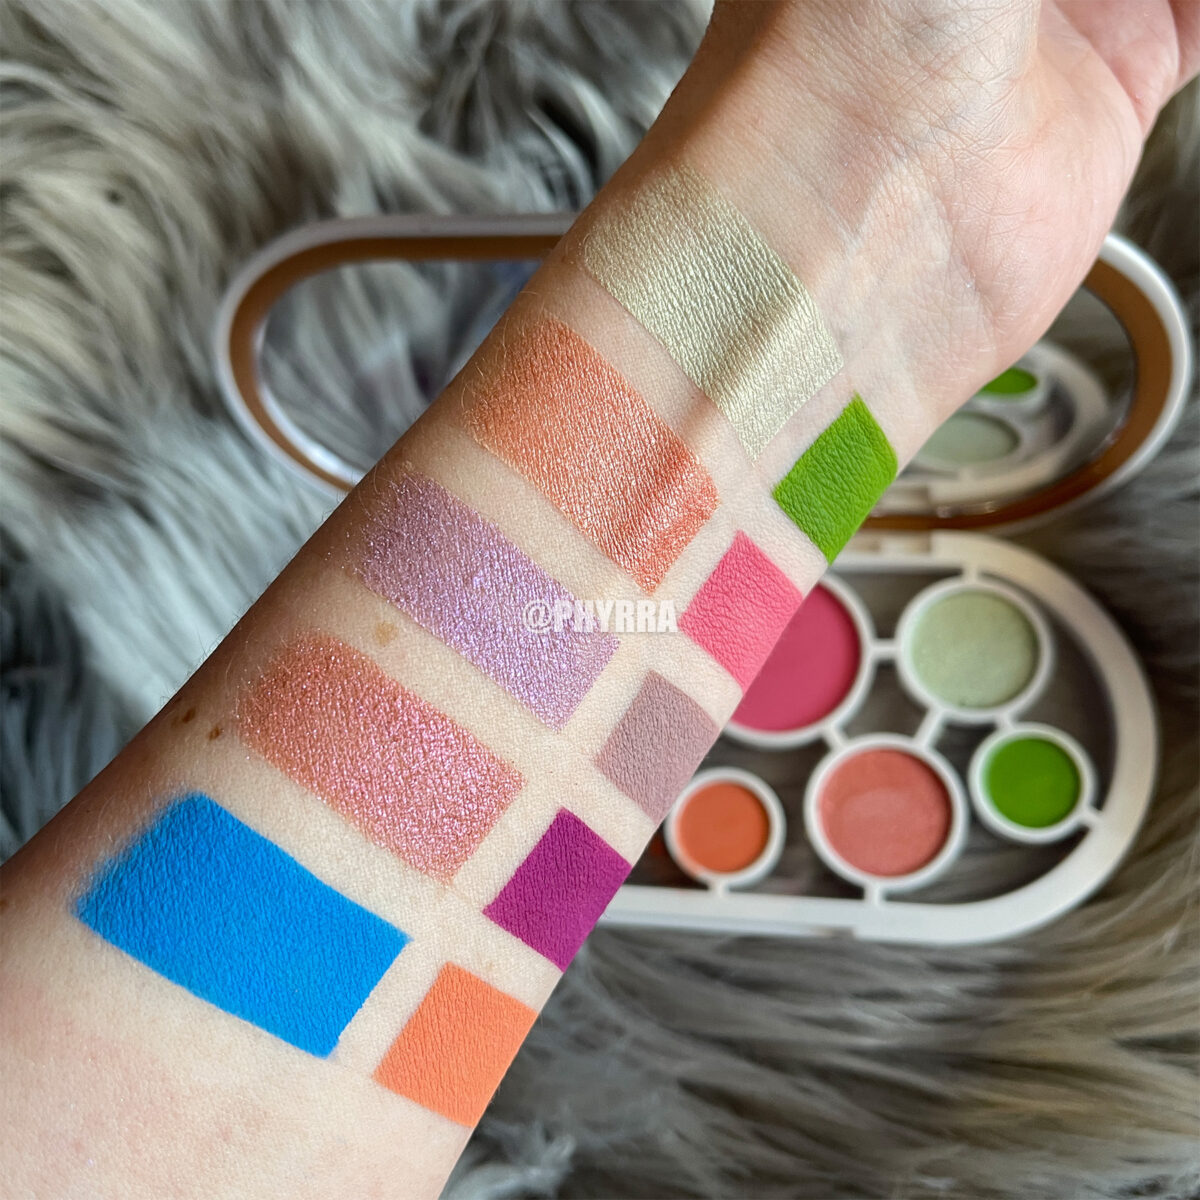 Sugarpill Anniversary Capsule Palette Review and Swatches on Fair Skin